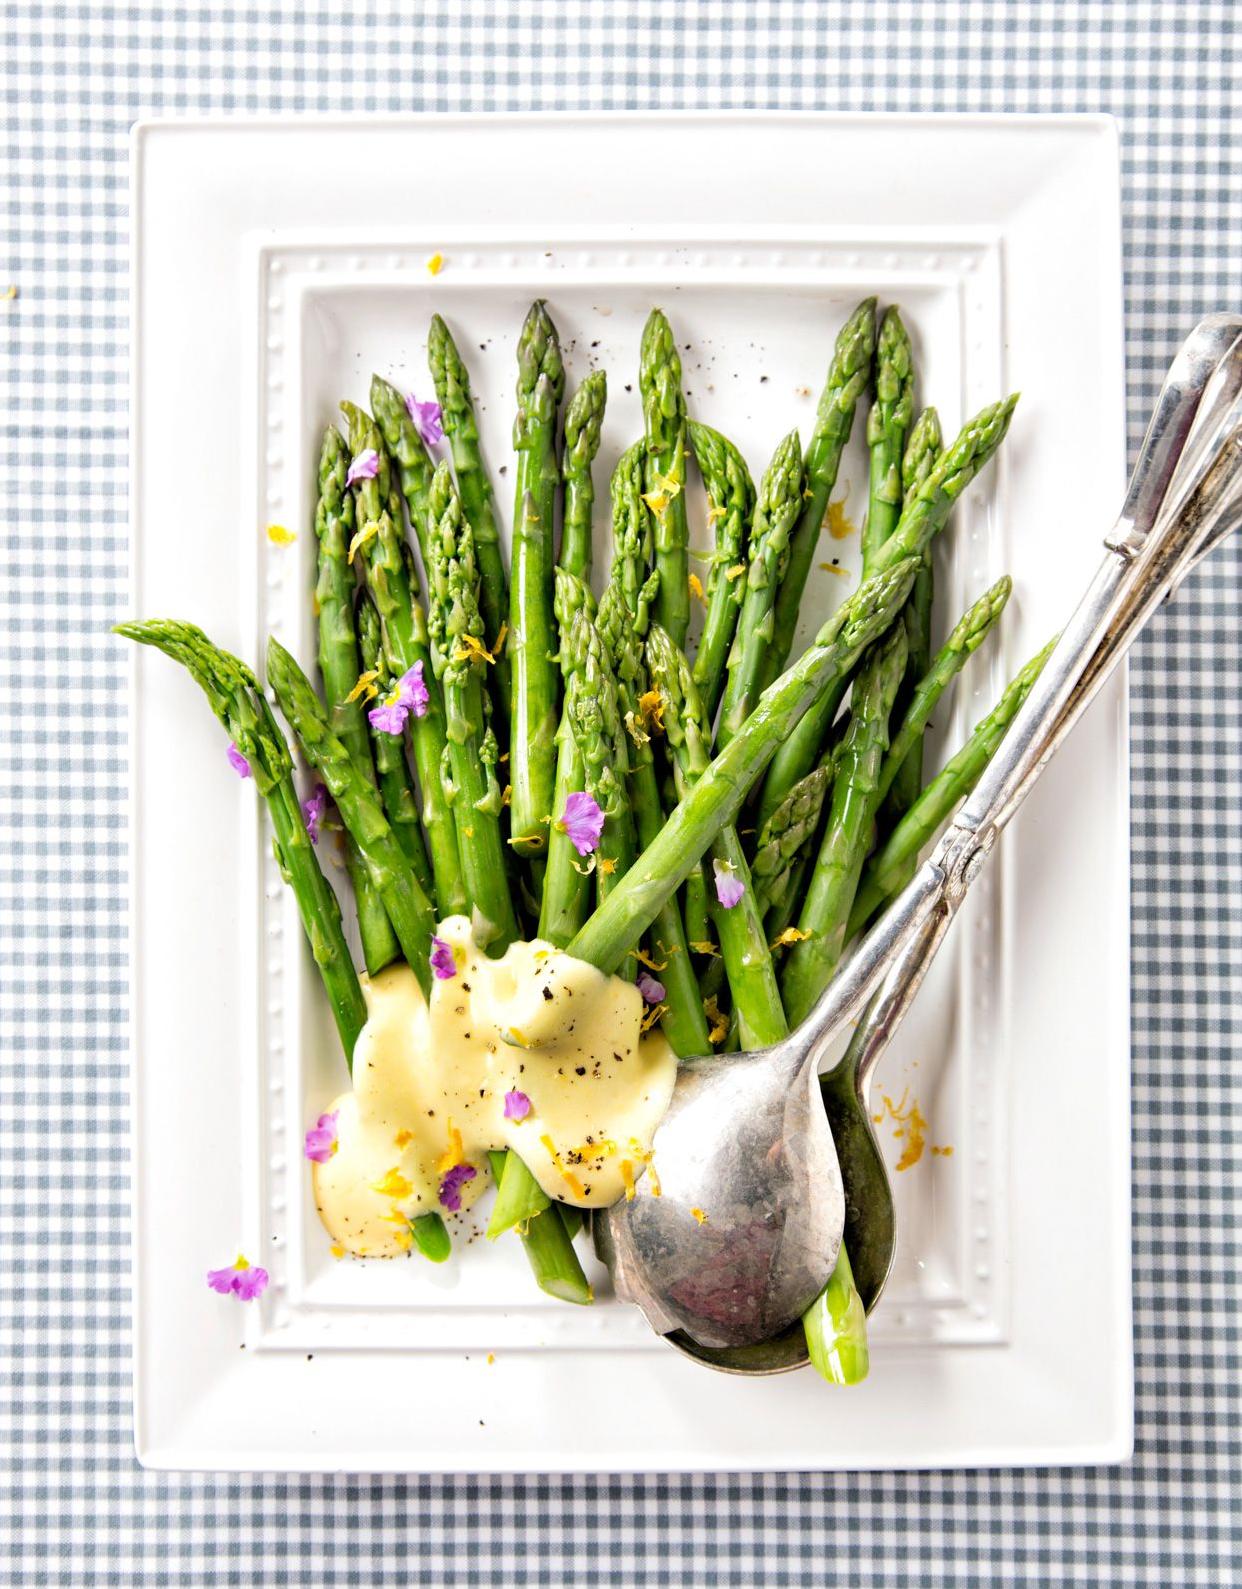  Elevate your asparagus game